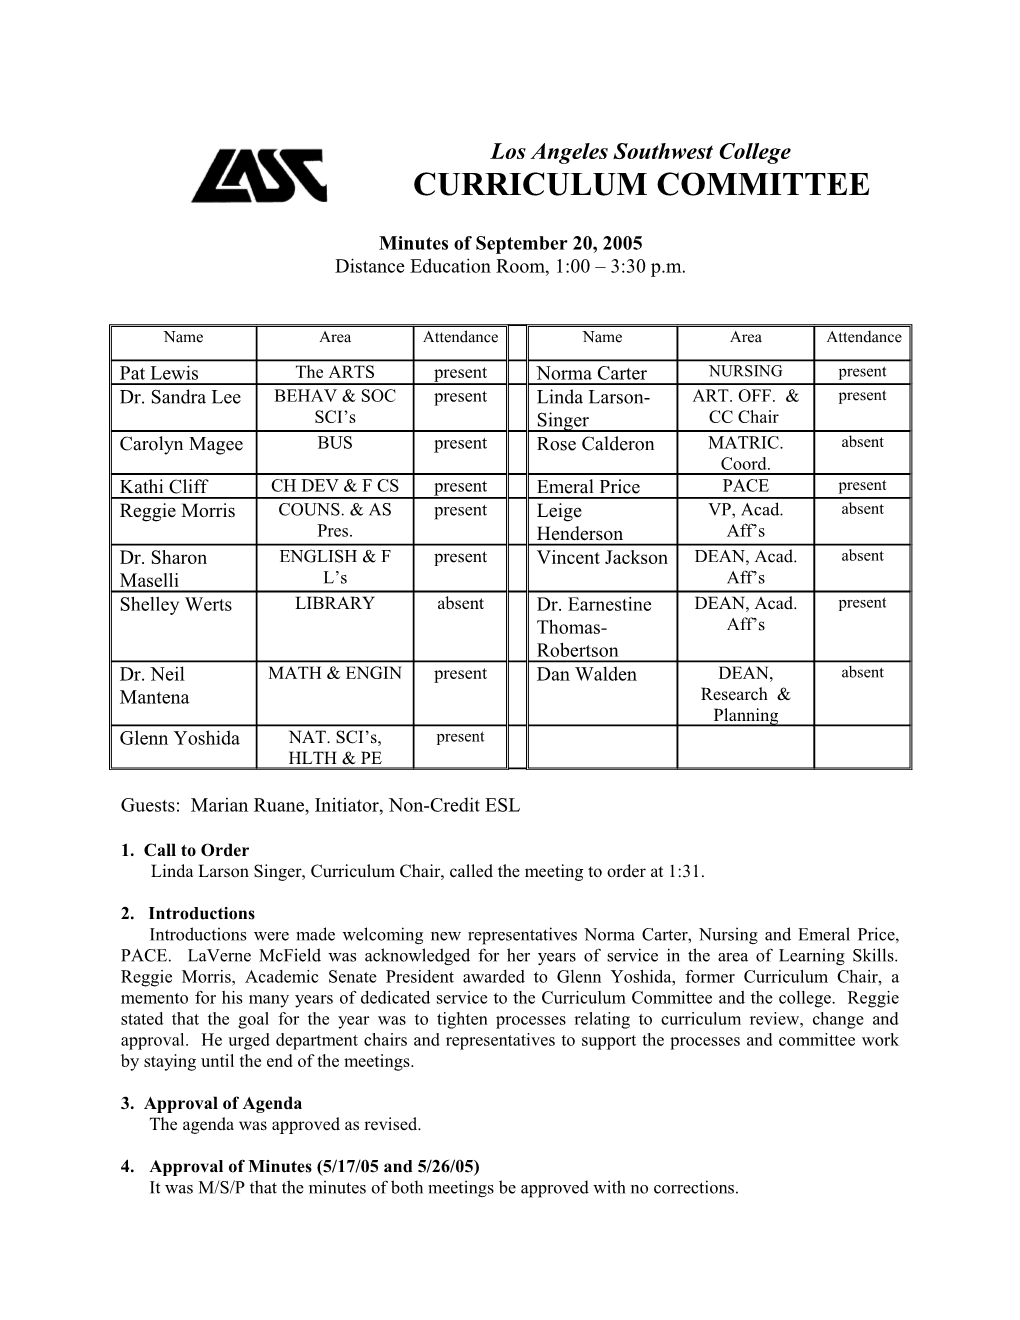 Los Angelessouthwestcollege; Curriculum Committee, Minutes of September 20, 2005 Page 1 of 3